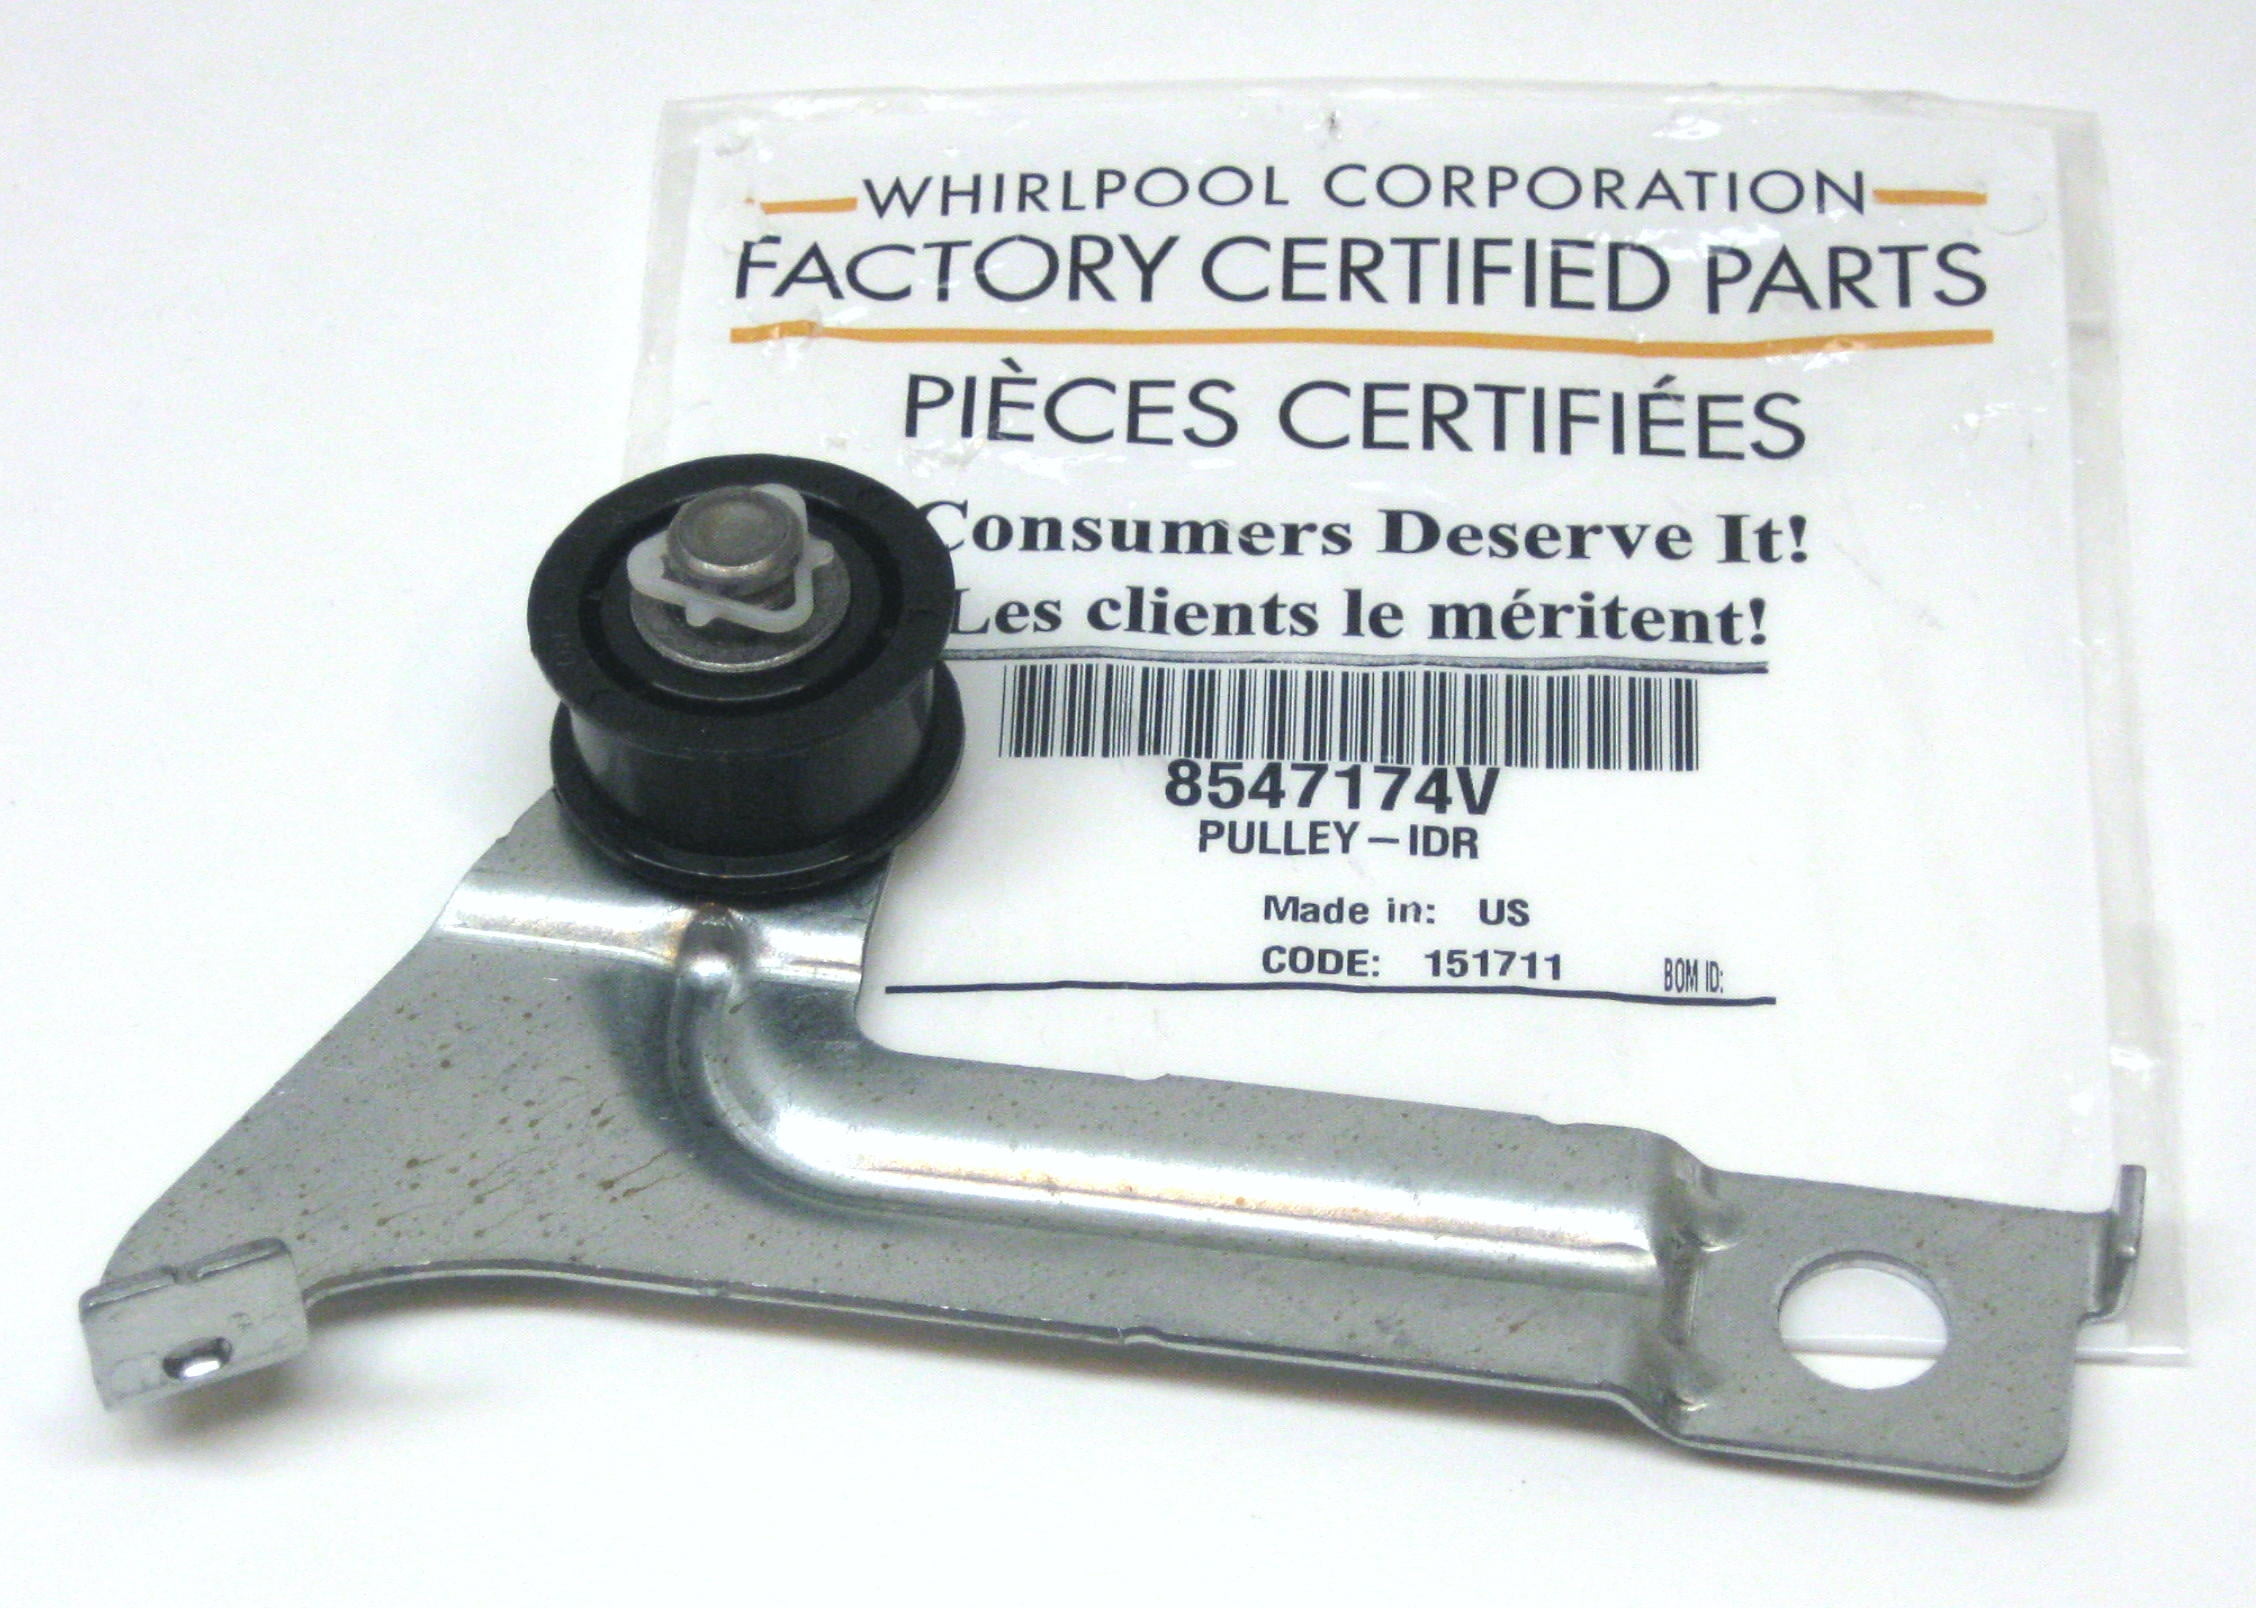 2 x 8547174 Dryer Idler Pulley Wheel for Whirlpool Cabrio 